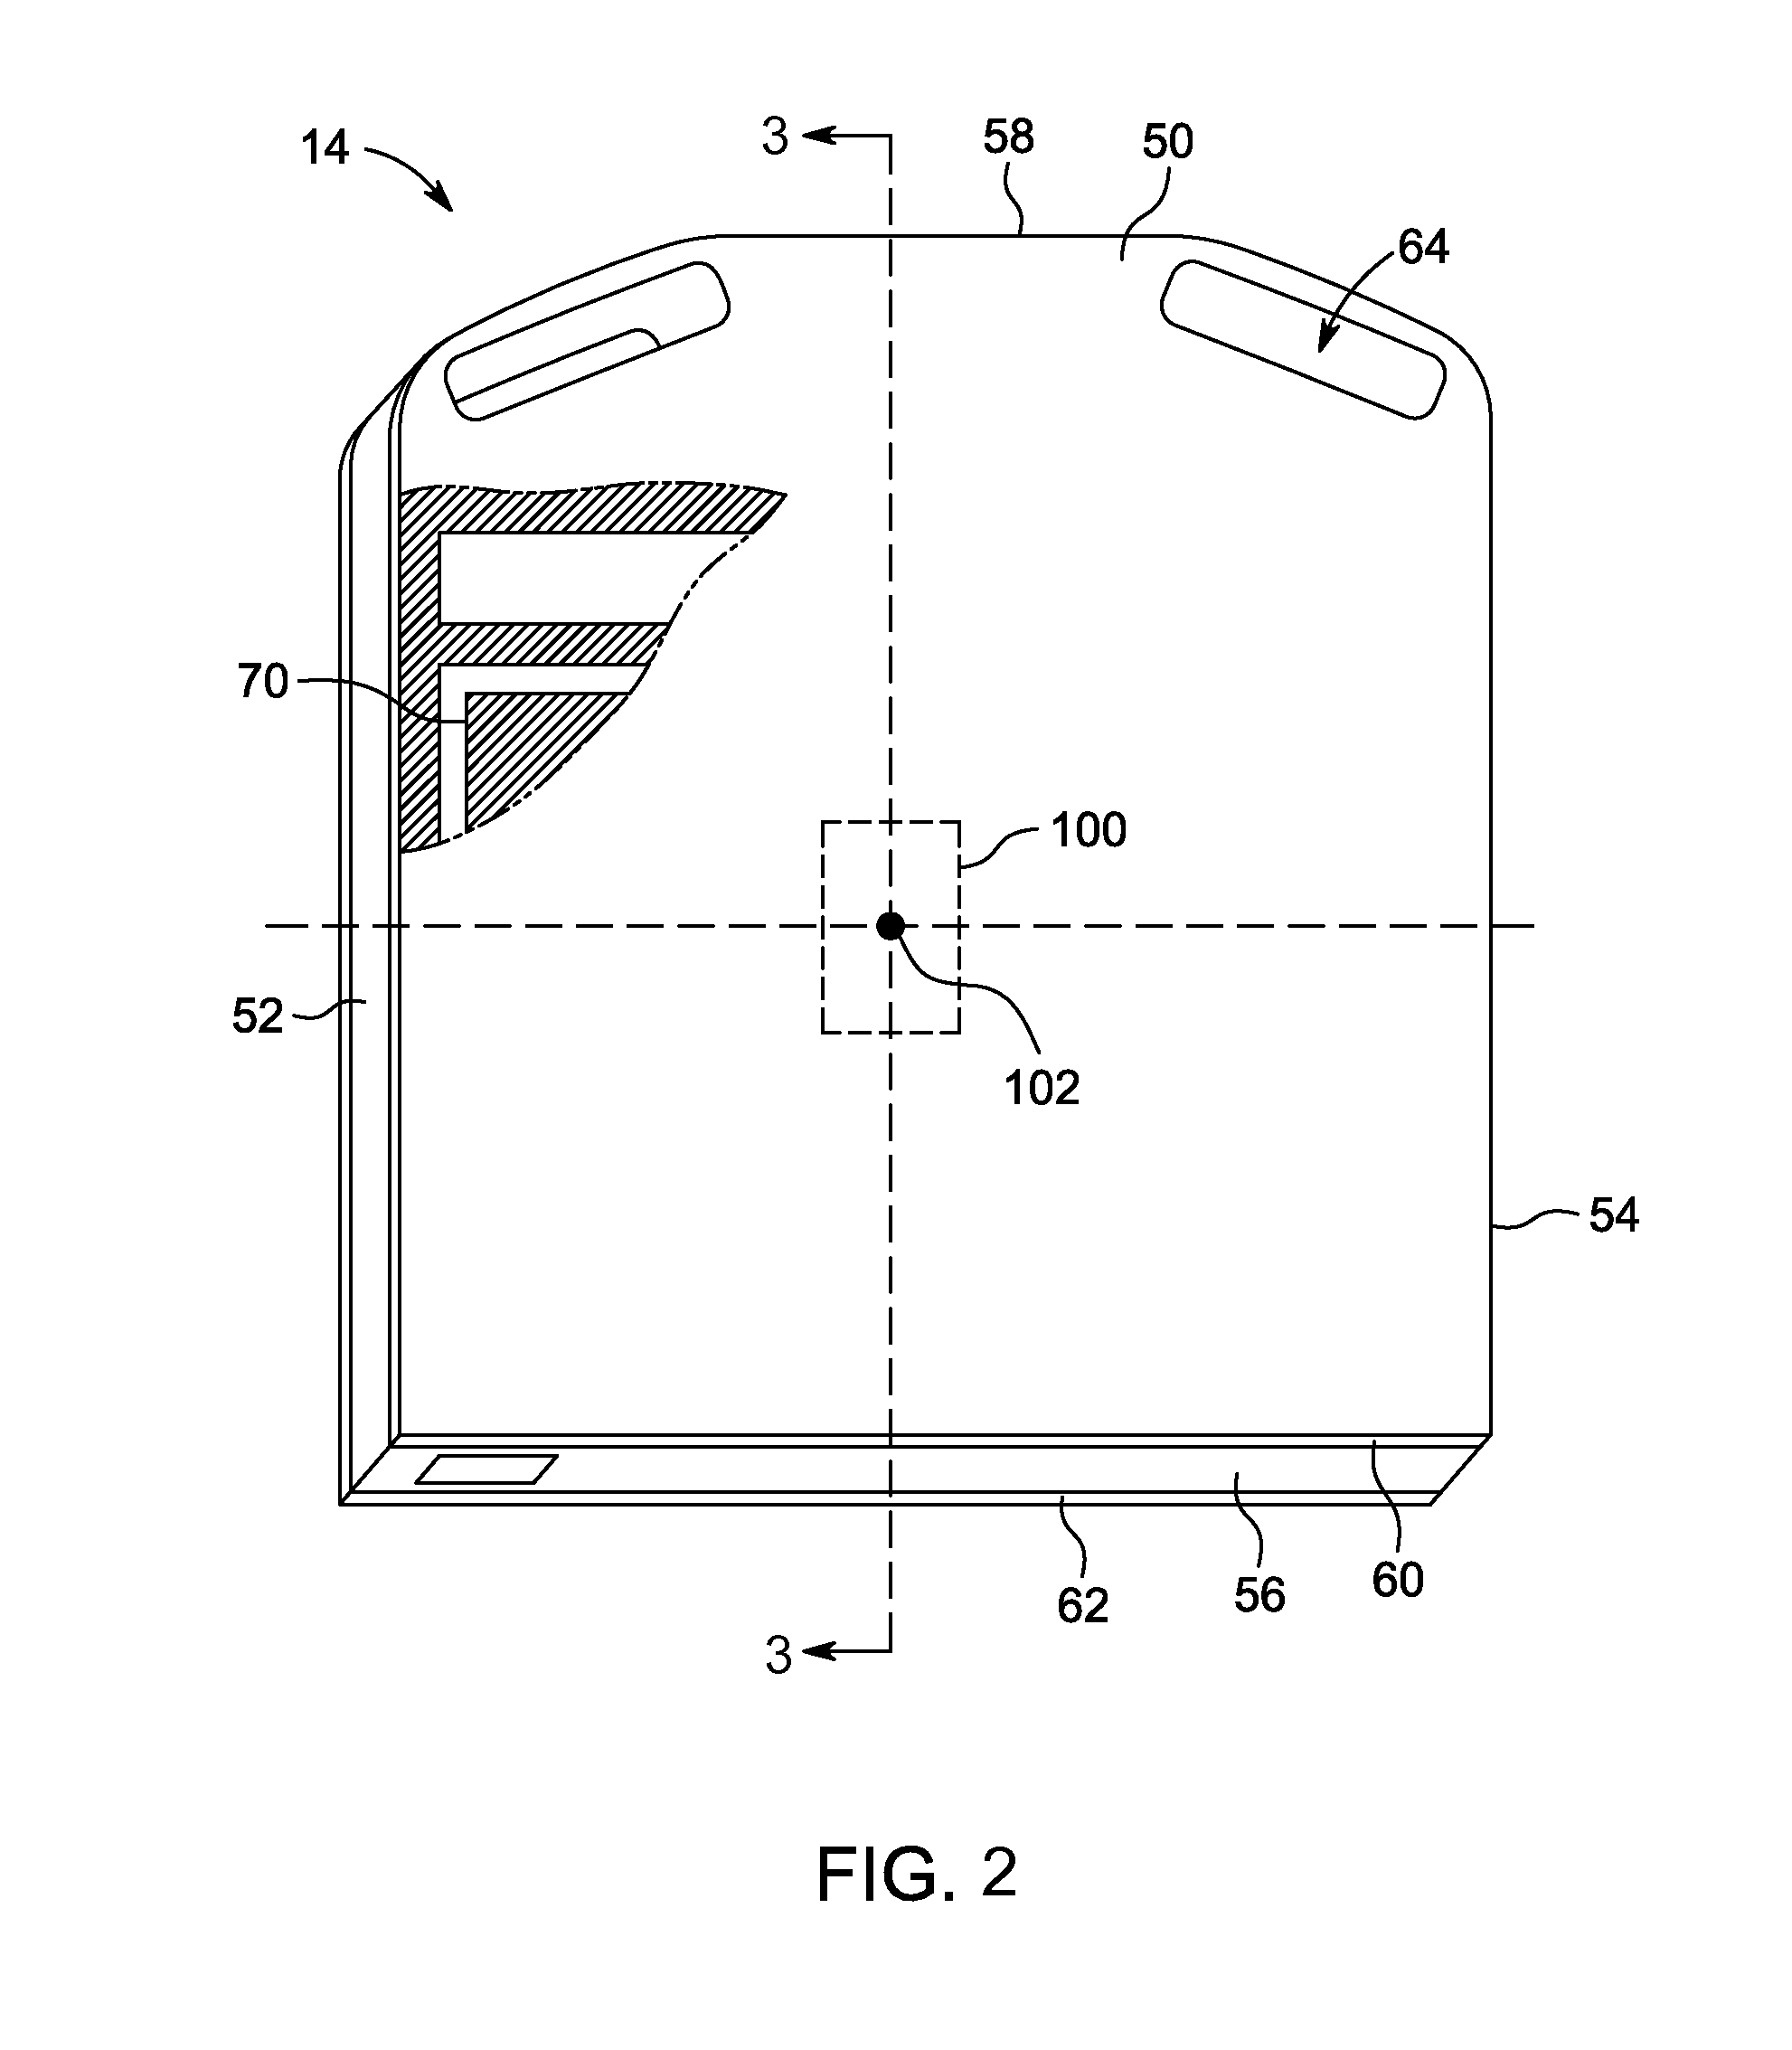 Position sensing device for a portable detection device